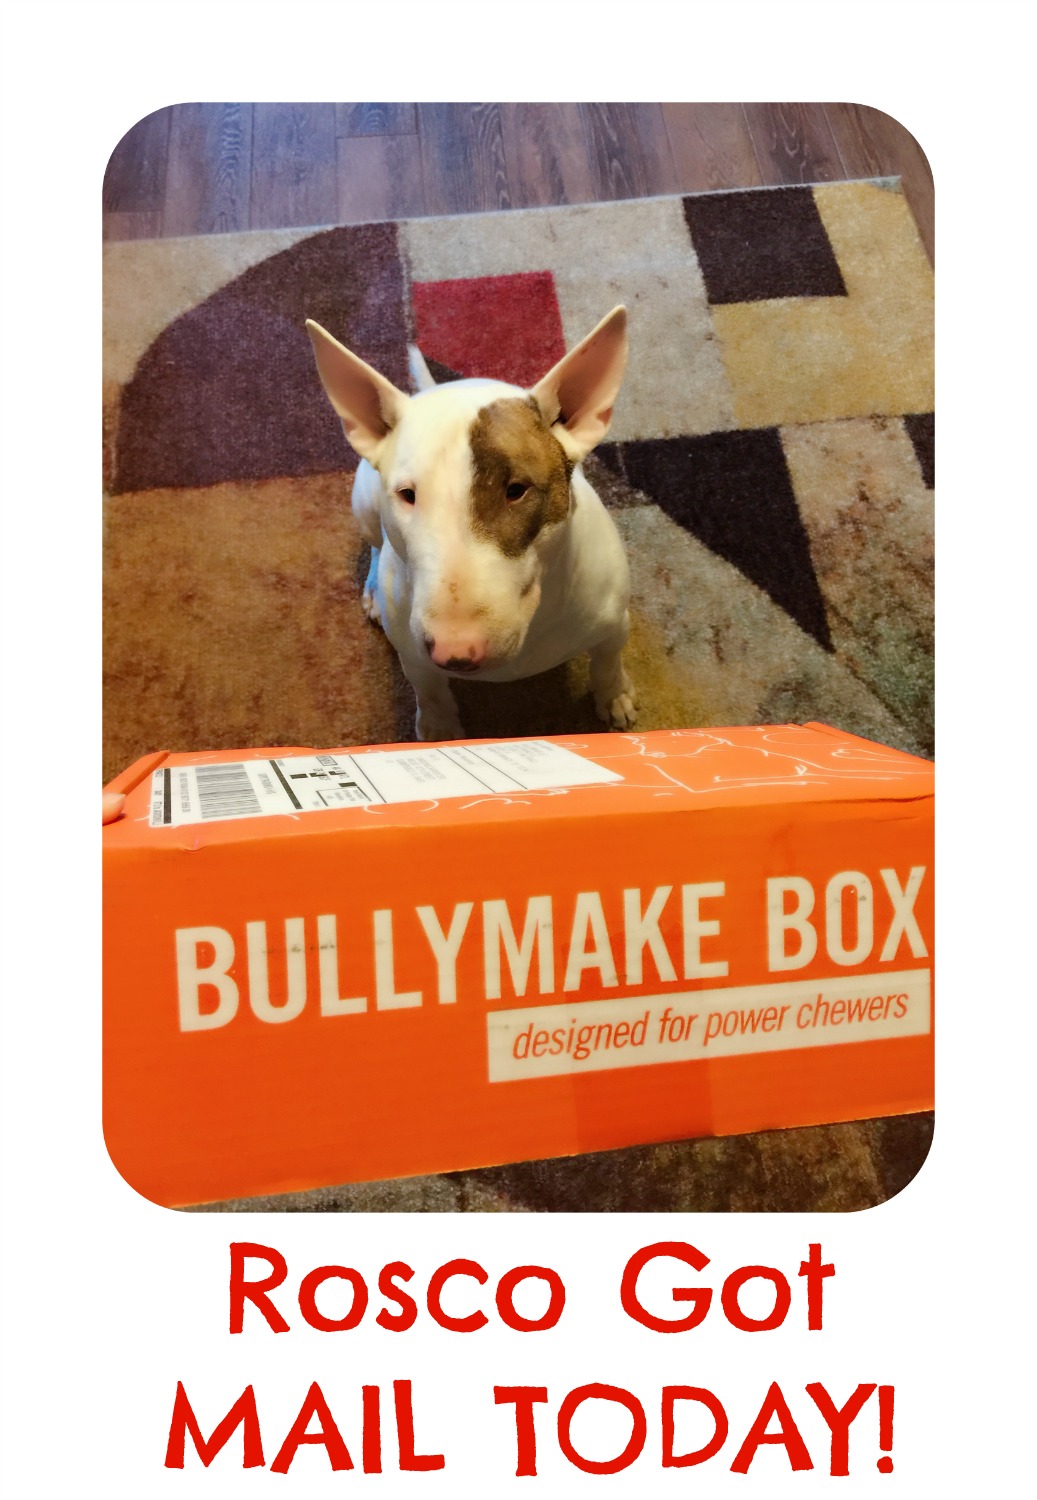 Rosco got mail from Bullymake Box!  He LOVED it!